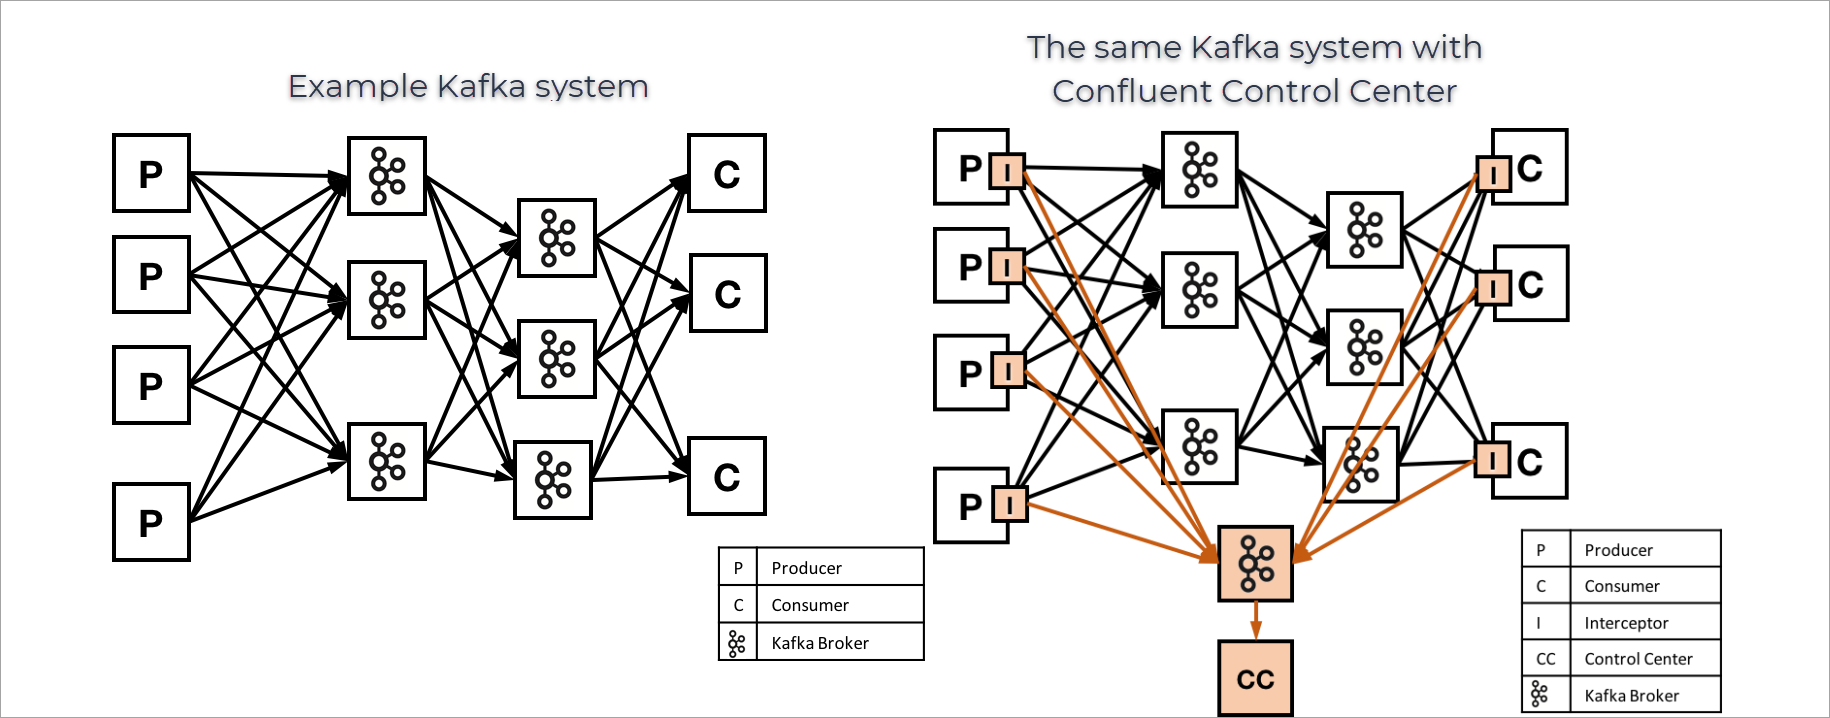 ../../_images/cp-kafka-with-c3-comparison.png